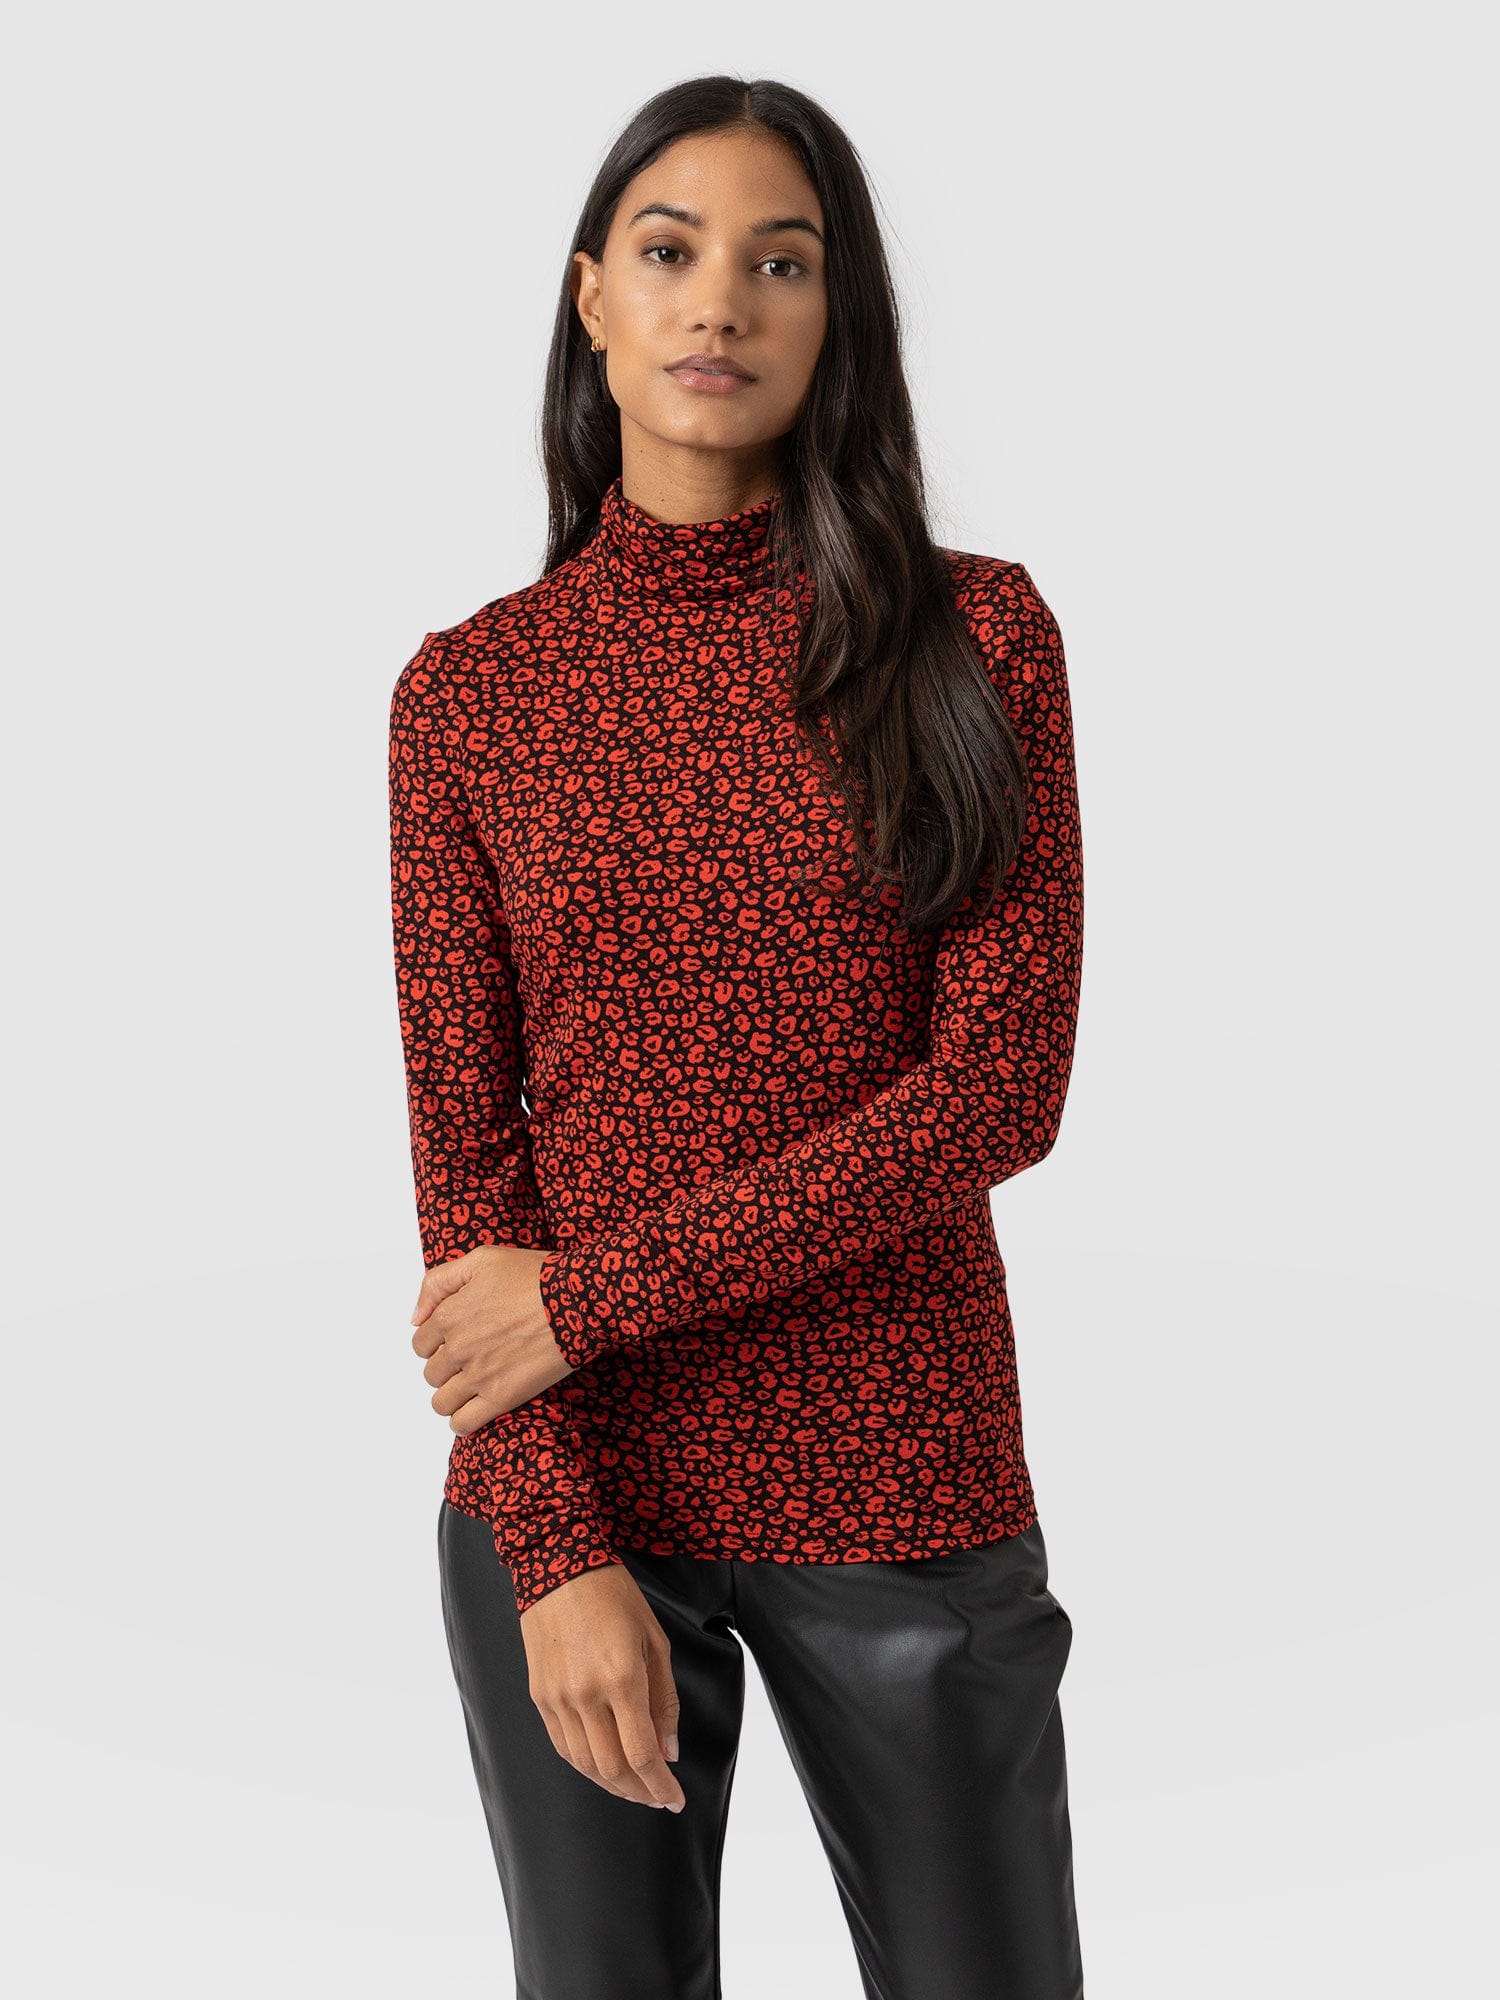 Tempest Turtle Neck Top - Red Leopard